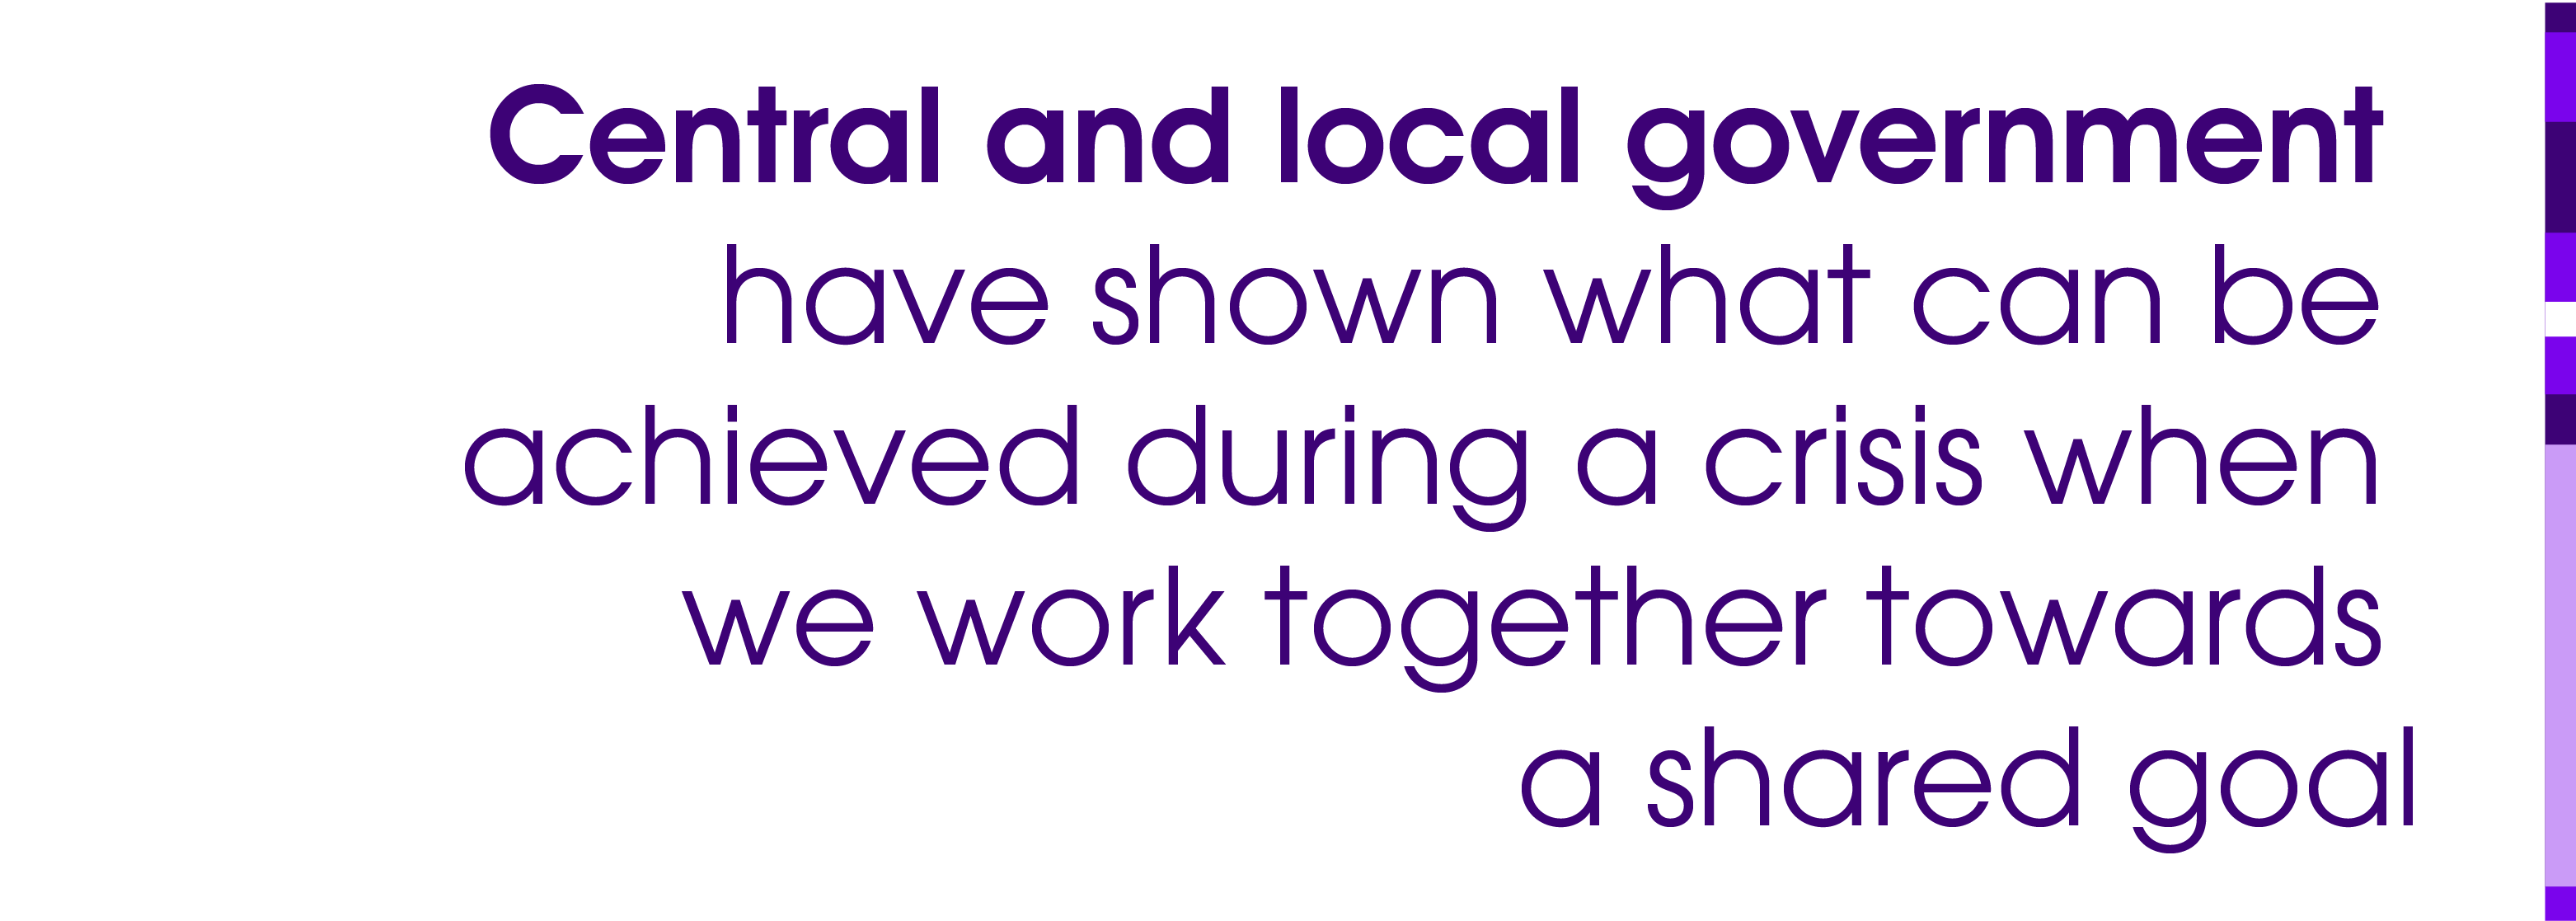 Central and local government have shown what can be achieved during a crisis when we work together towards a shared goal.